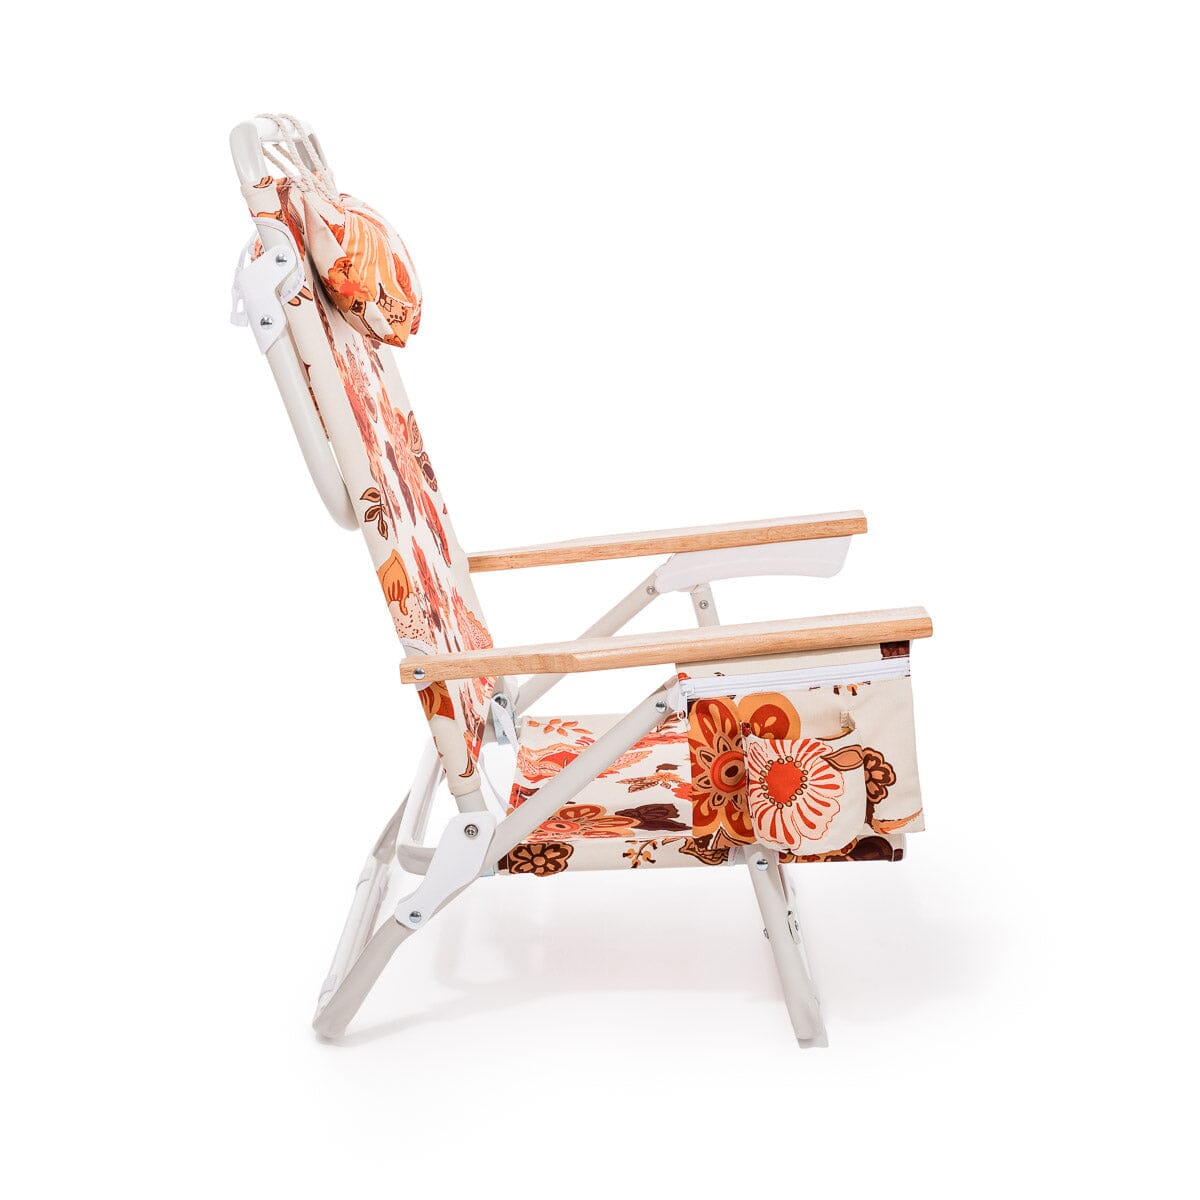 The Holiday Tommy Chair - Paisley Bay Holiday Tommy Chair Business & Pleasure Co. 